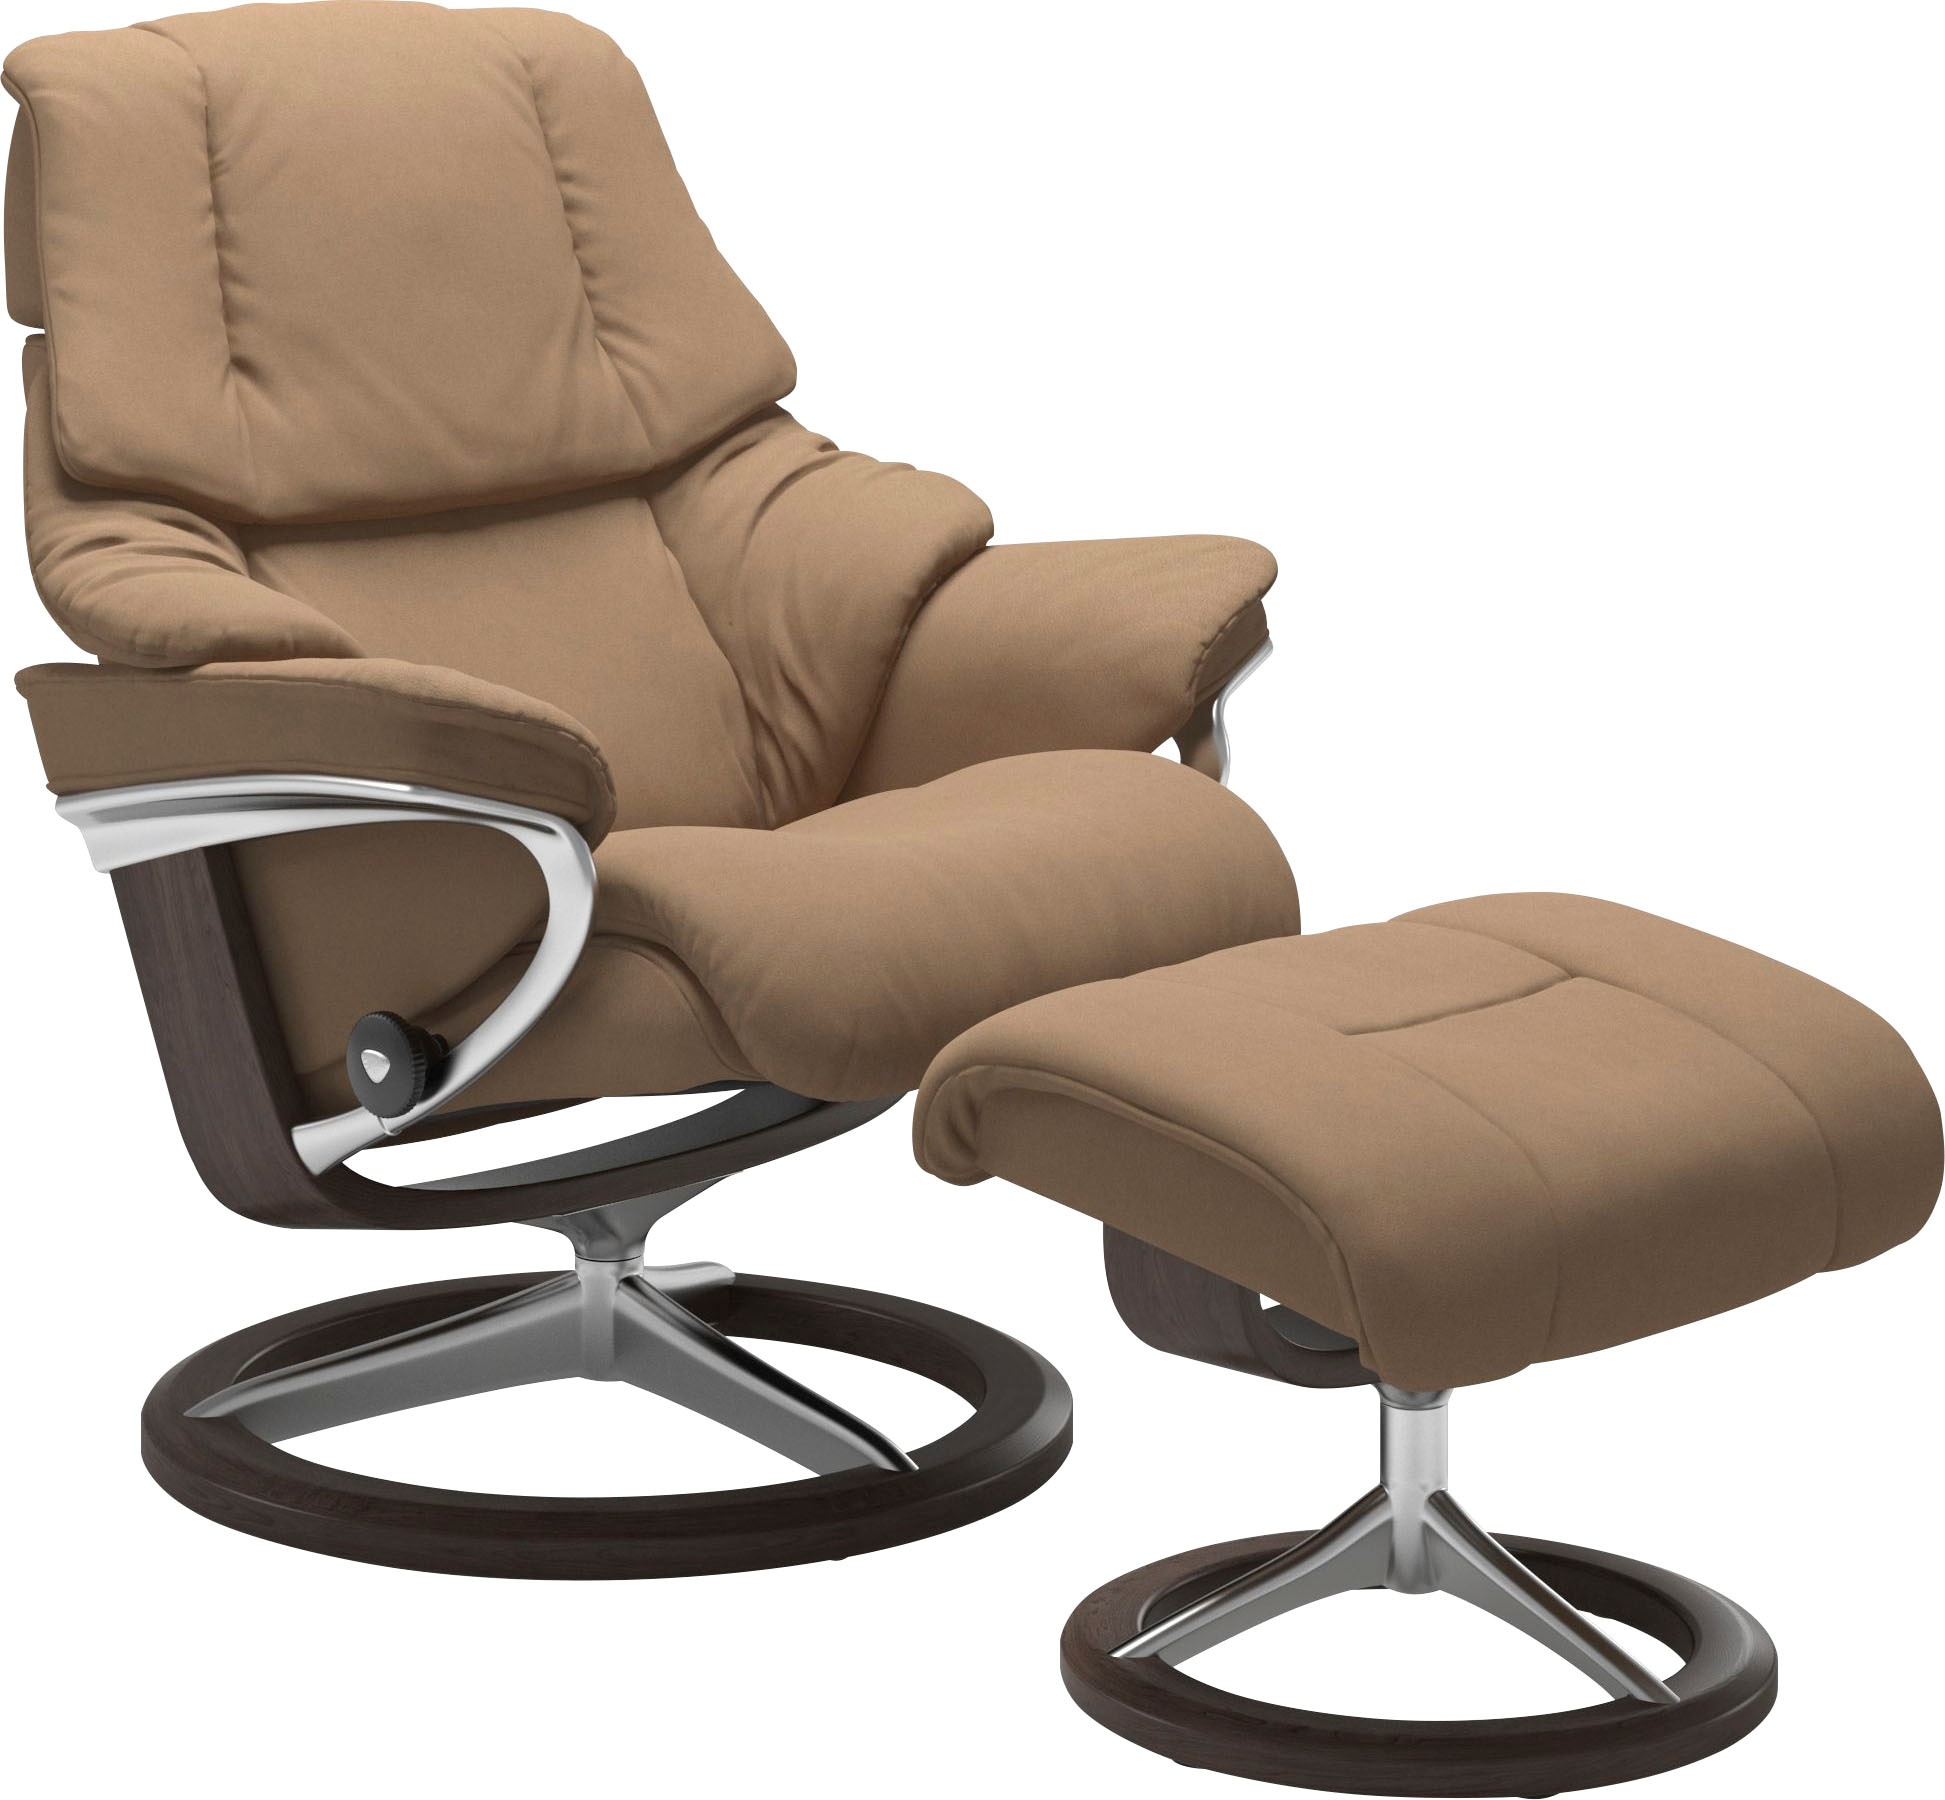 Relaxsessel STRESSLESS "Reno" Sessel Gr. Microfaser DINAMICA, Signature Base Wenge, Relaxfunktion-Drehfunktion-PlusTMSystem-Gleitsystem-BalanceAdaptTM, B/H/T: 79 cm x 99 cm x 75 cm, braun (sand dinamica) Lesesessel und Relaxsessel